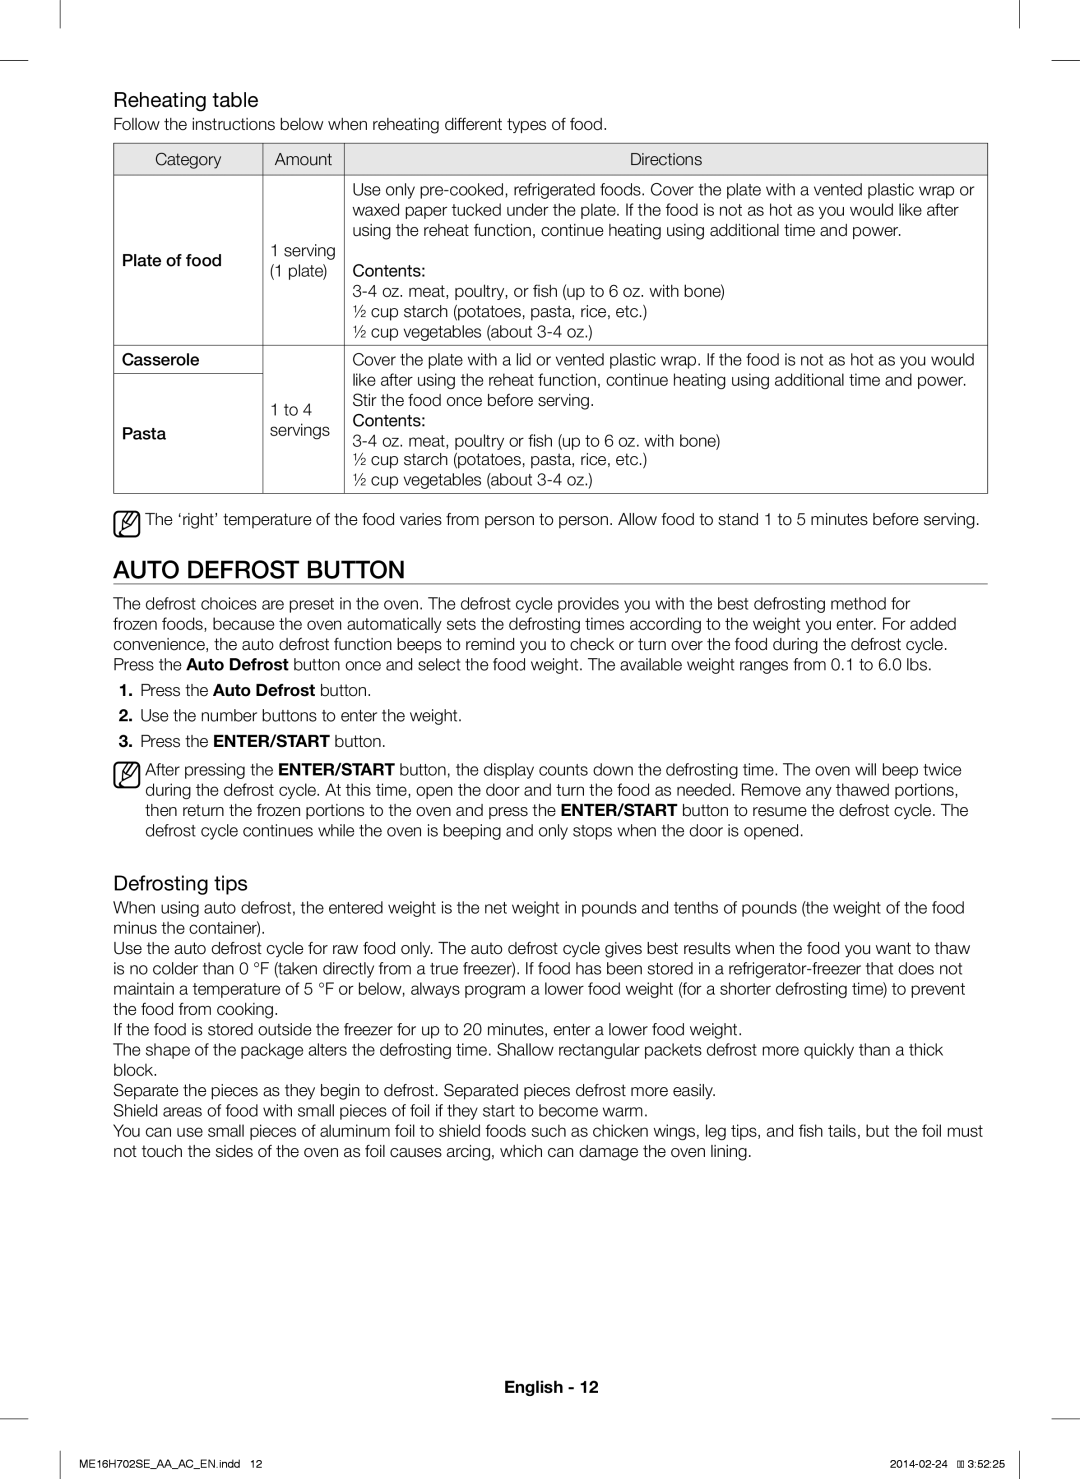 Samsung ME16H702SE user manual Auto Defrost Button, Reheating table, Defrosting tips, English 